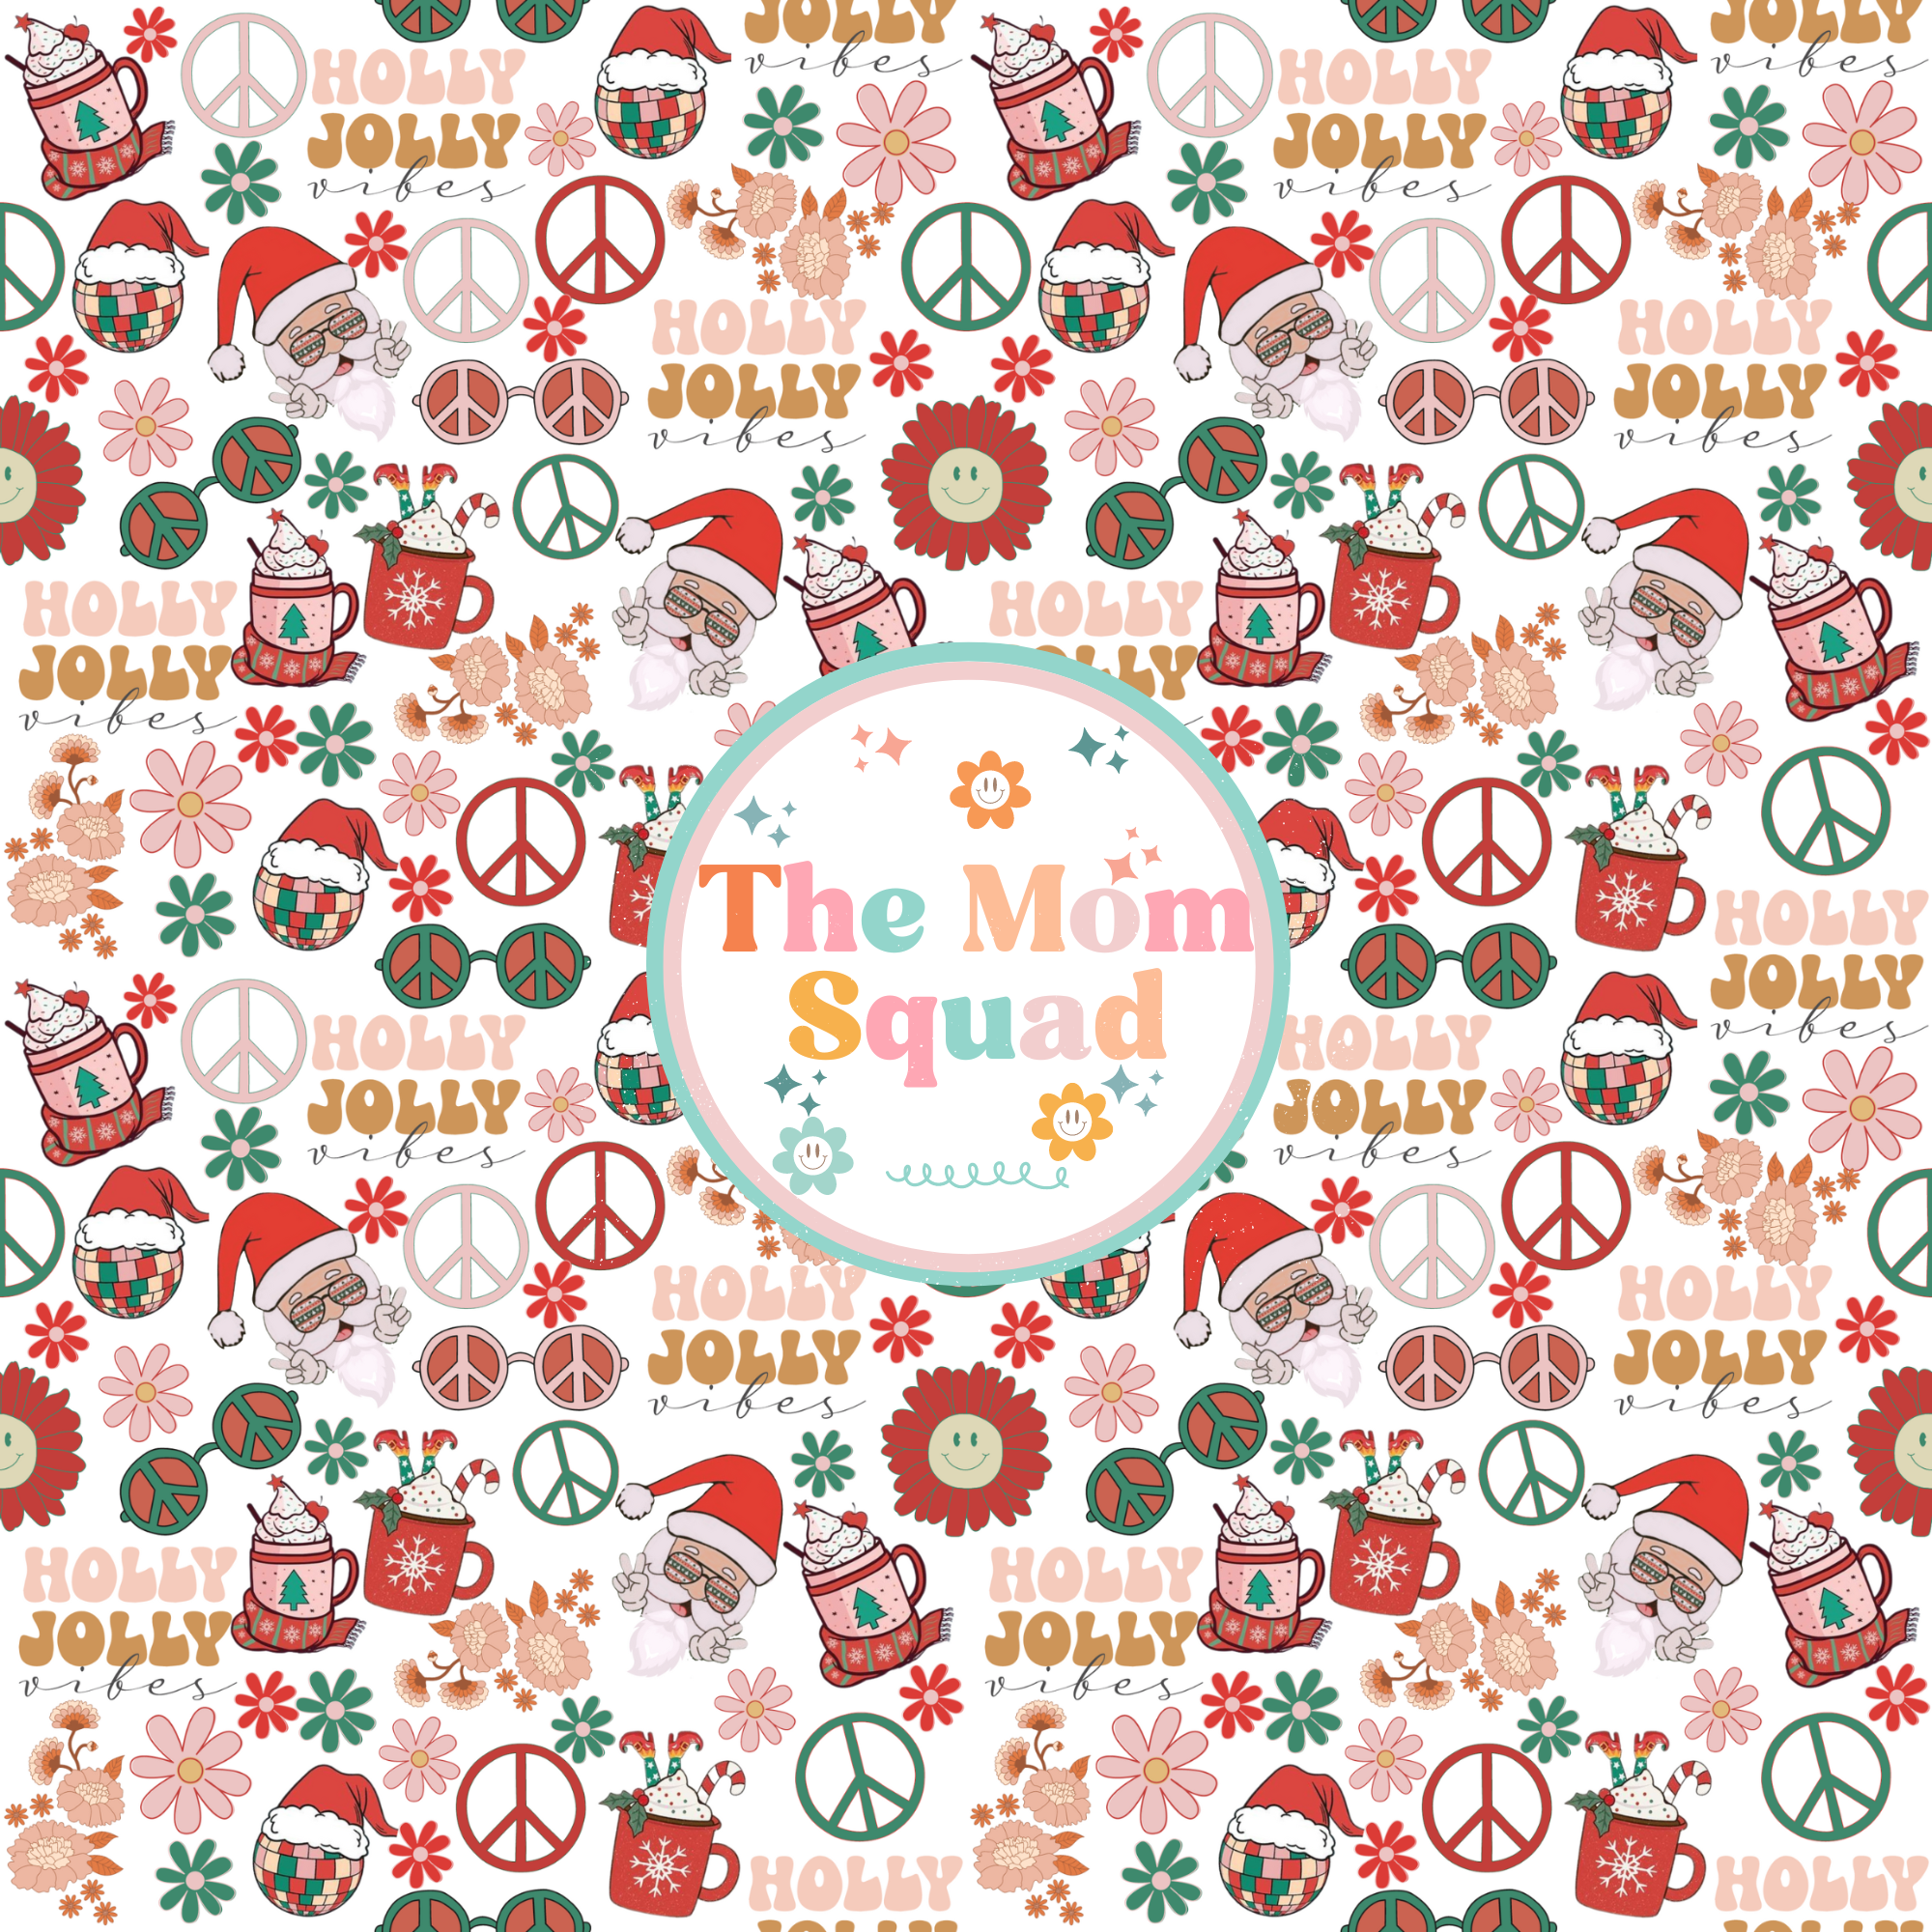 40 Preppy Christmas Seamless Patterns, Colorful Christmas Patterns